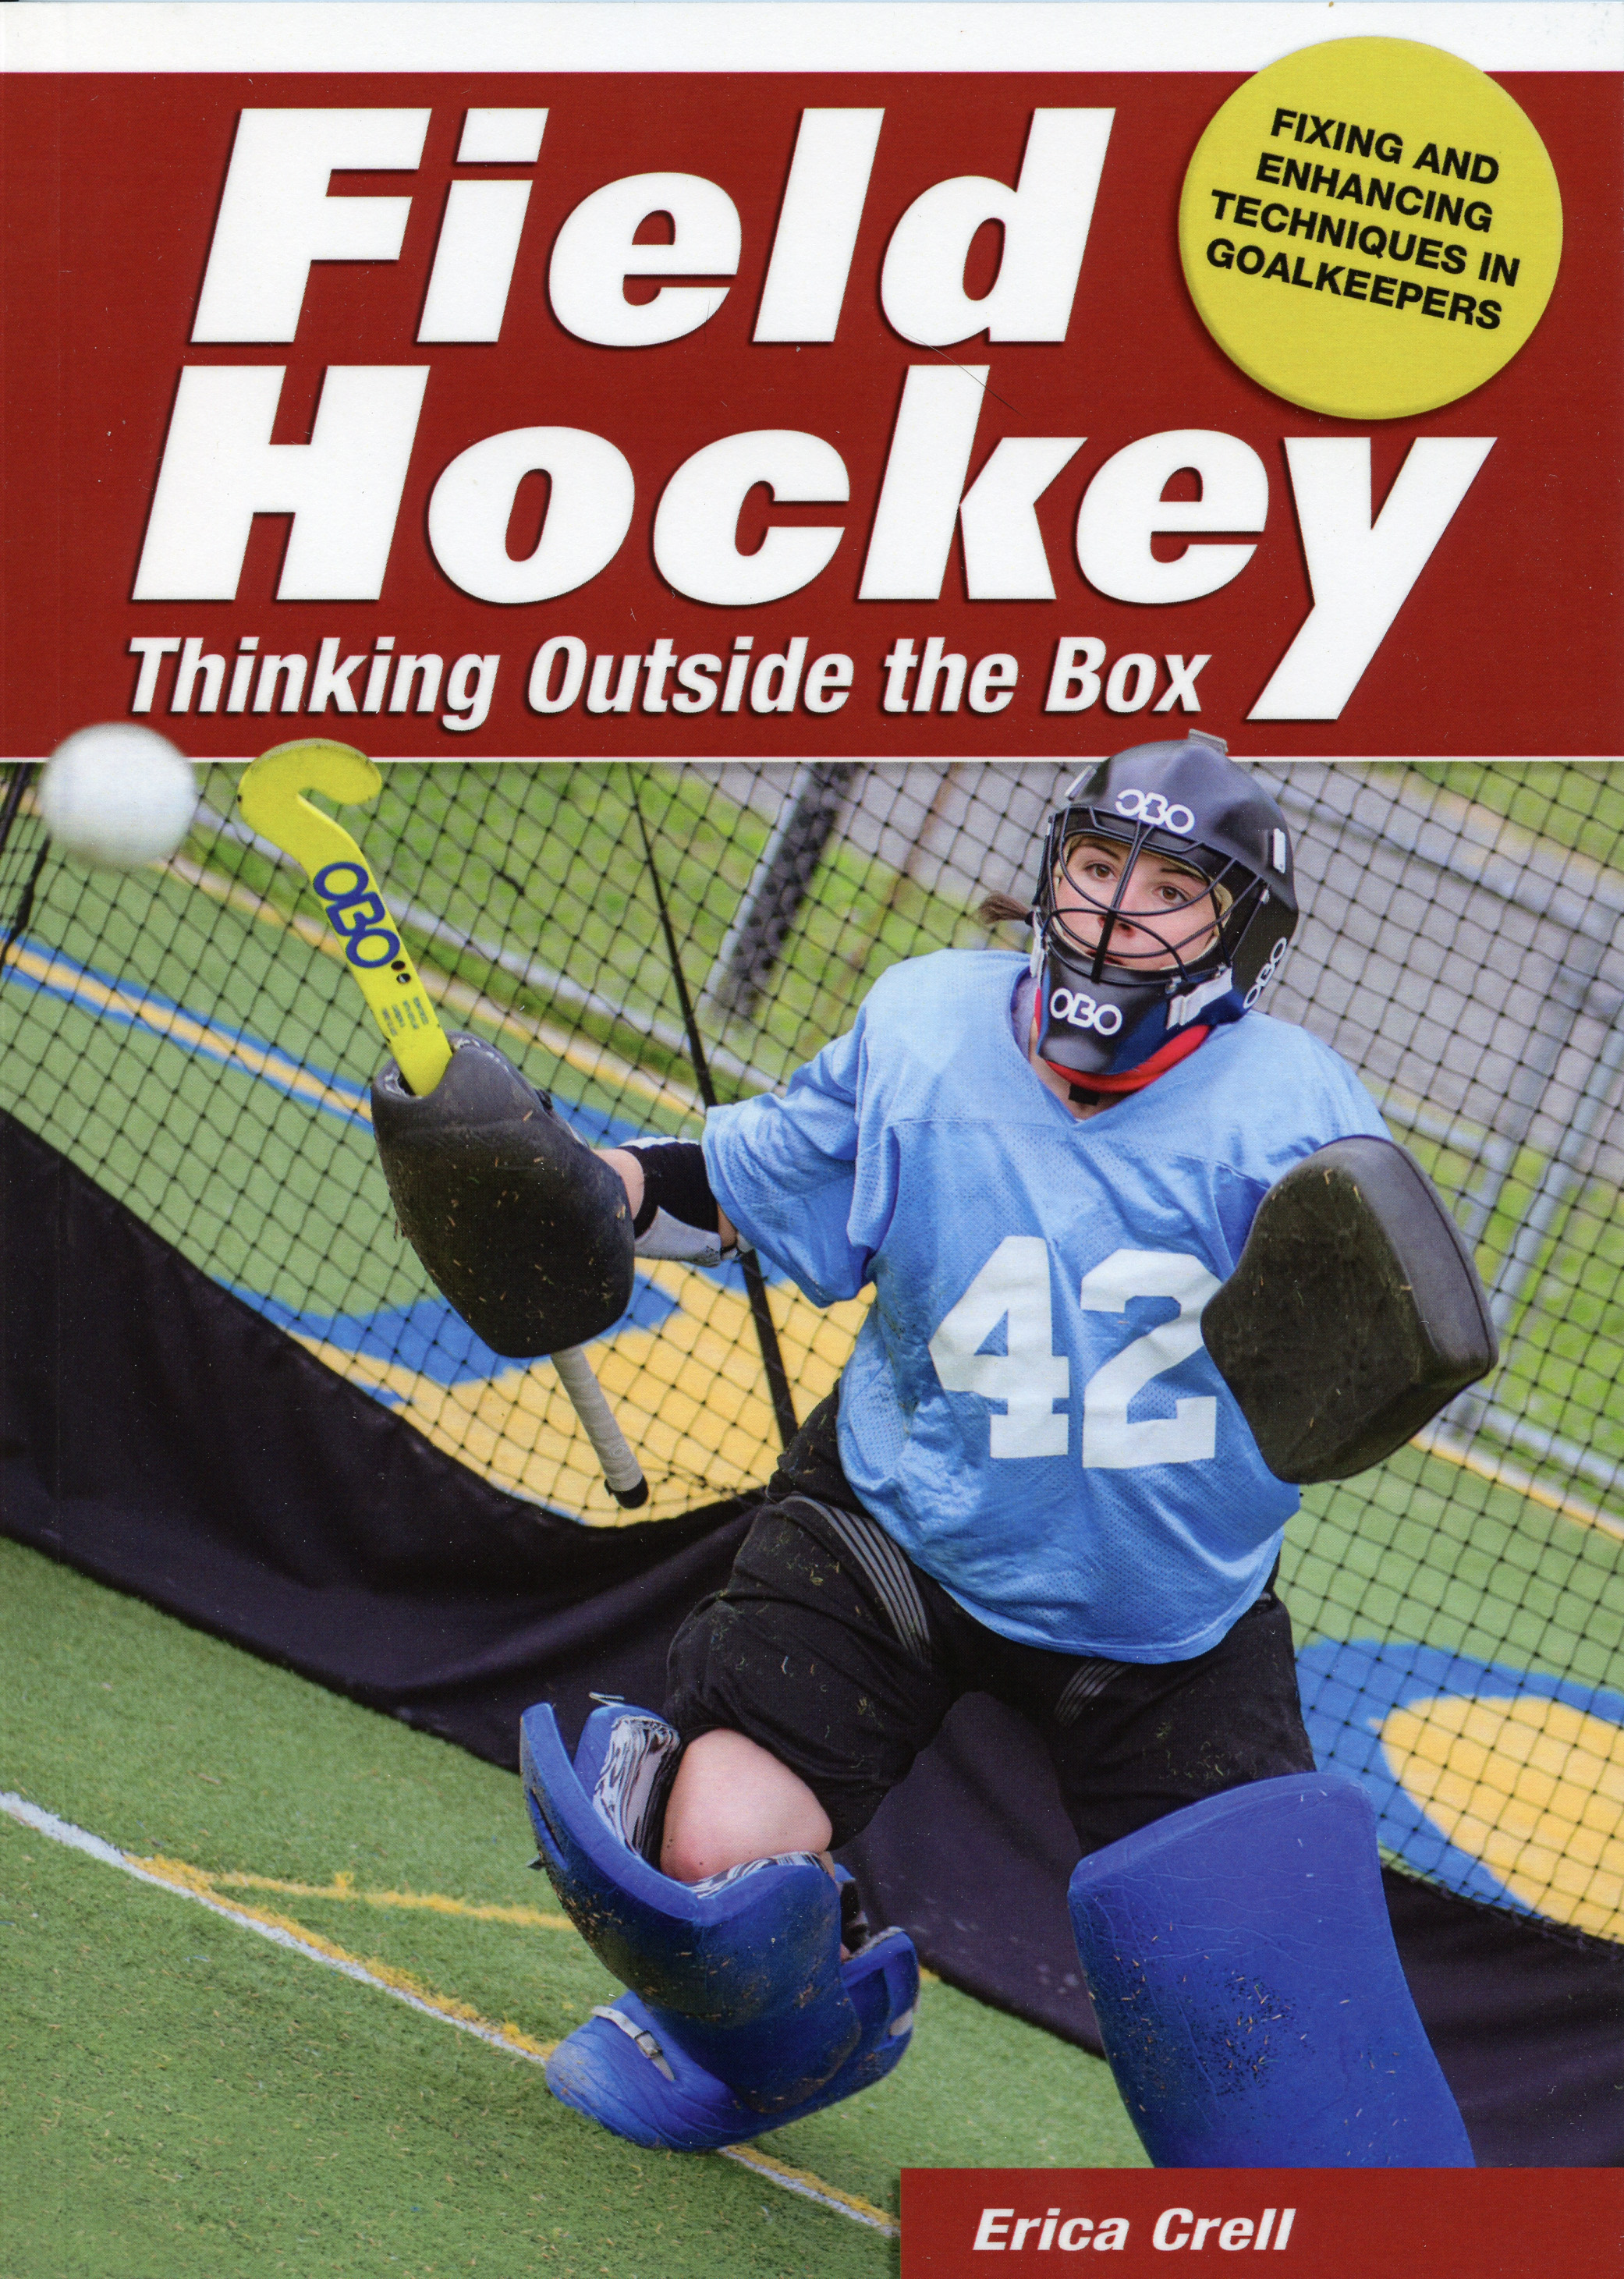 "A creative approach to that problem we all deal with: how do we tweak a goalkeeper's bad habits and reinforce improved technique? The outside-the-box drills and tips gave me some new ideas where the same old drills weren't working. Thanks for sharing your knowledge!" -- Nicky Hitchens, Associate Head Field Hockey Coach, Drexel University

by Erica Crell
ISBN: 978-1930546-23-3
$12.95
Published in 2015